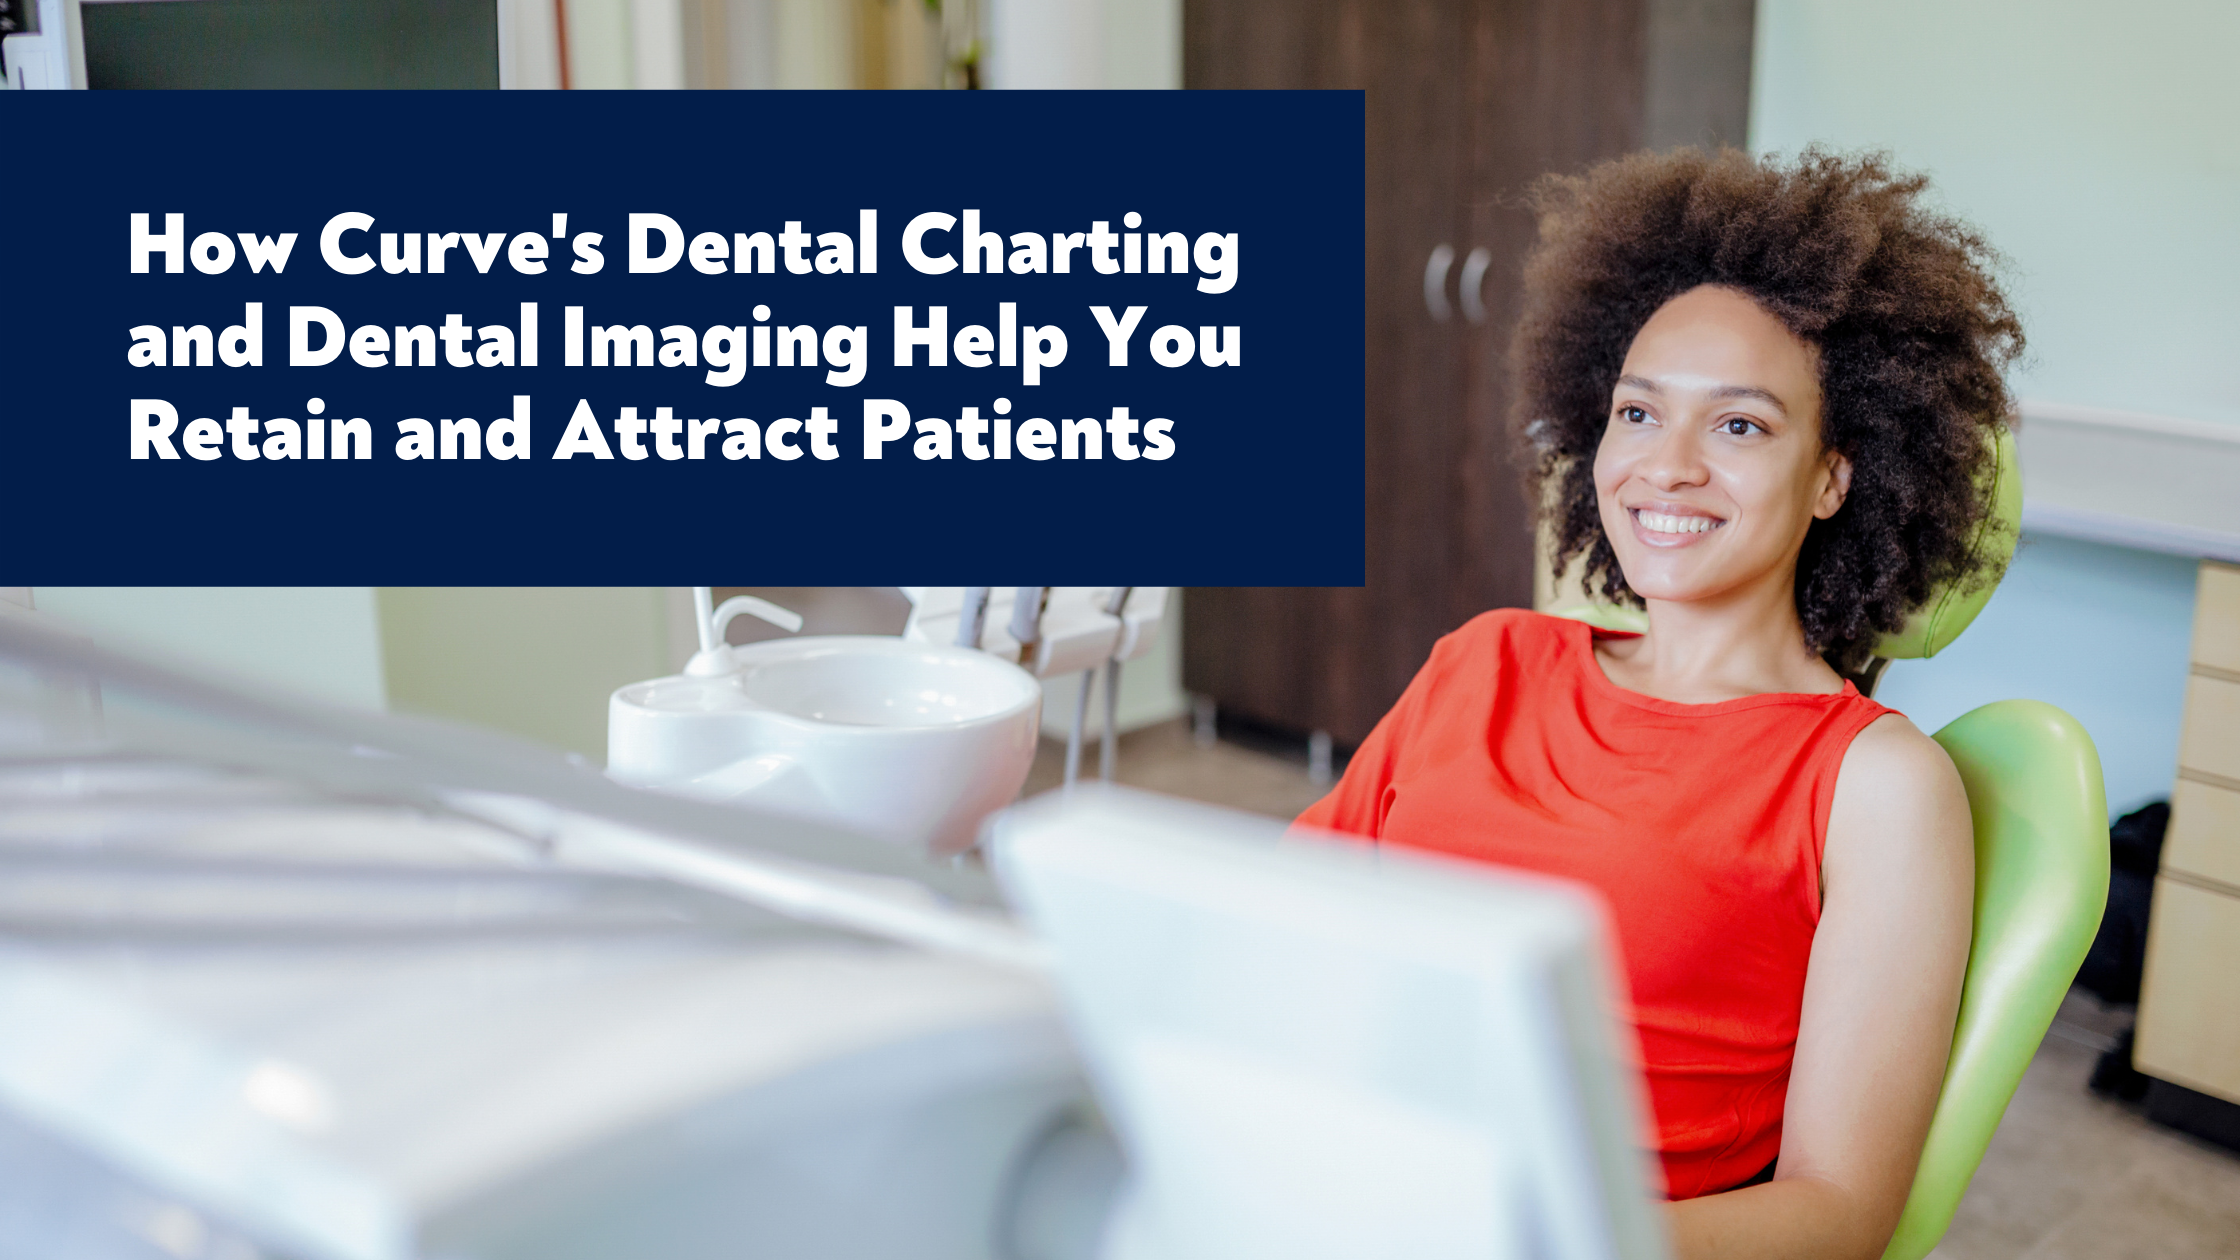 https://f.hubspotusercontent10.net/hubfs/2620515/BLOG%20How%20Curves%20Dental%20Charting%20and%20Dental%20Imaging%20Help%20You%20Retain%20and%20Attract%20Patients%20(10.07.2021).png